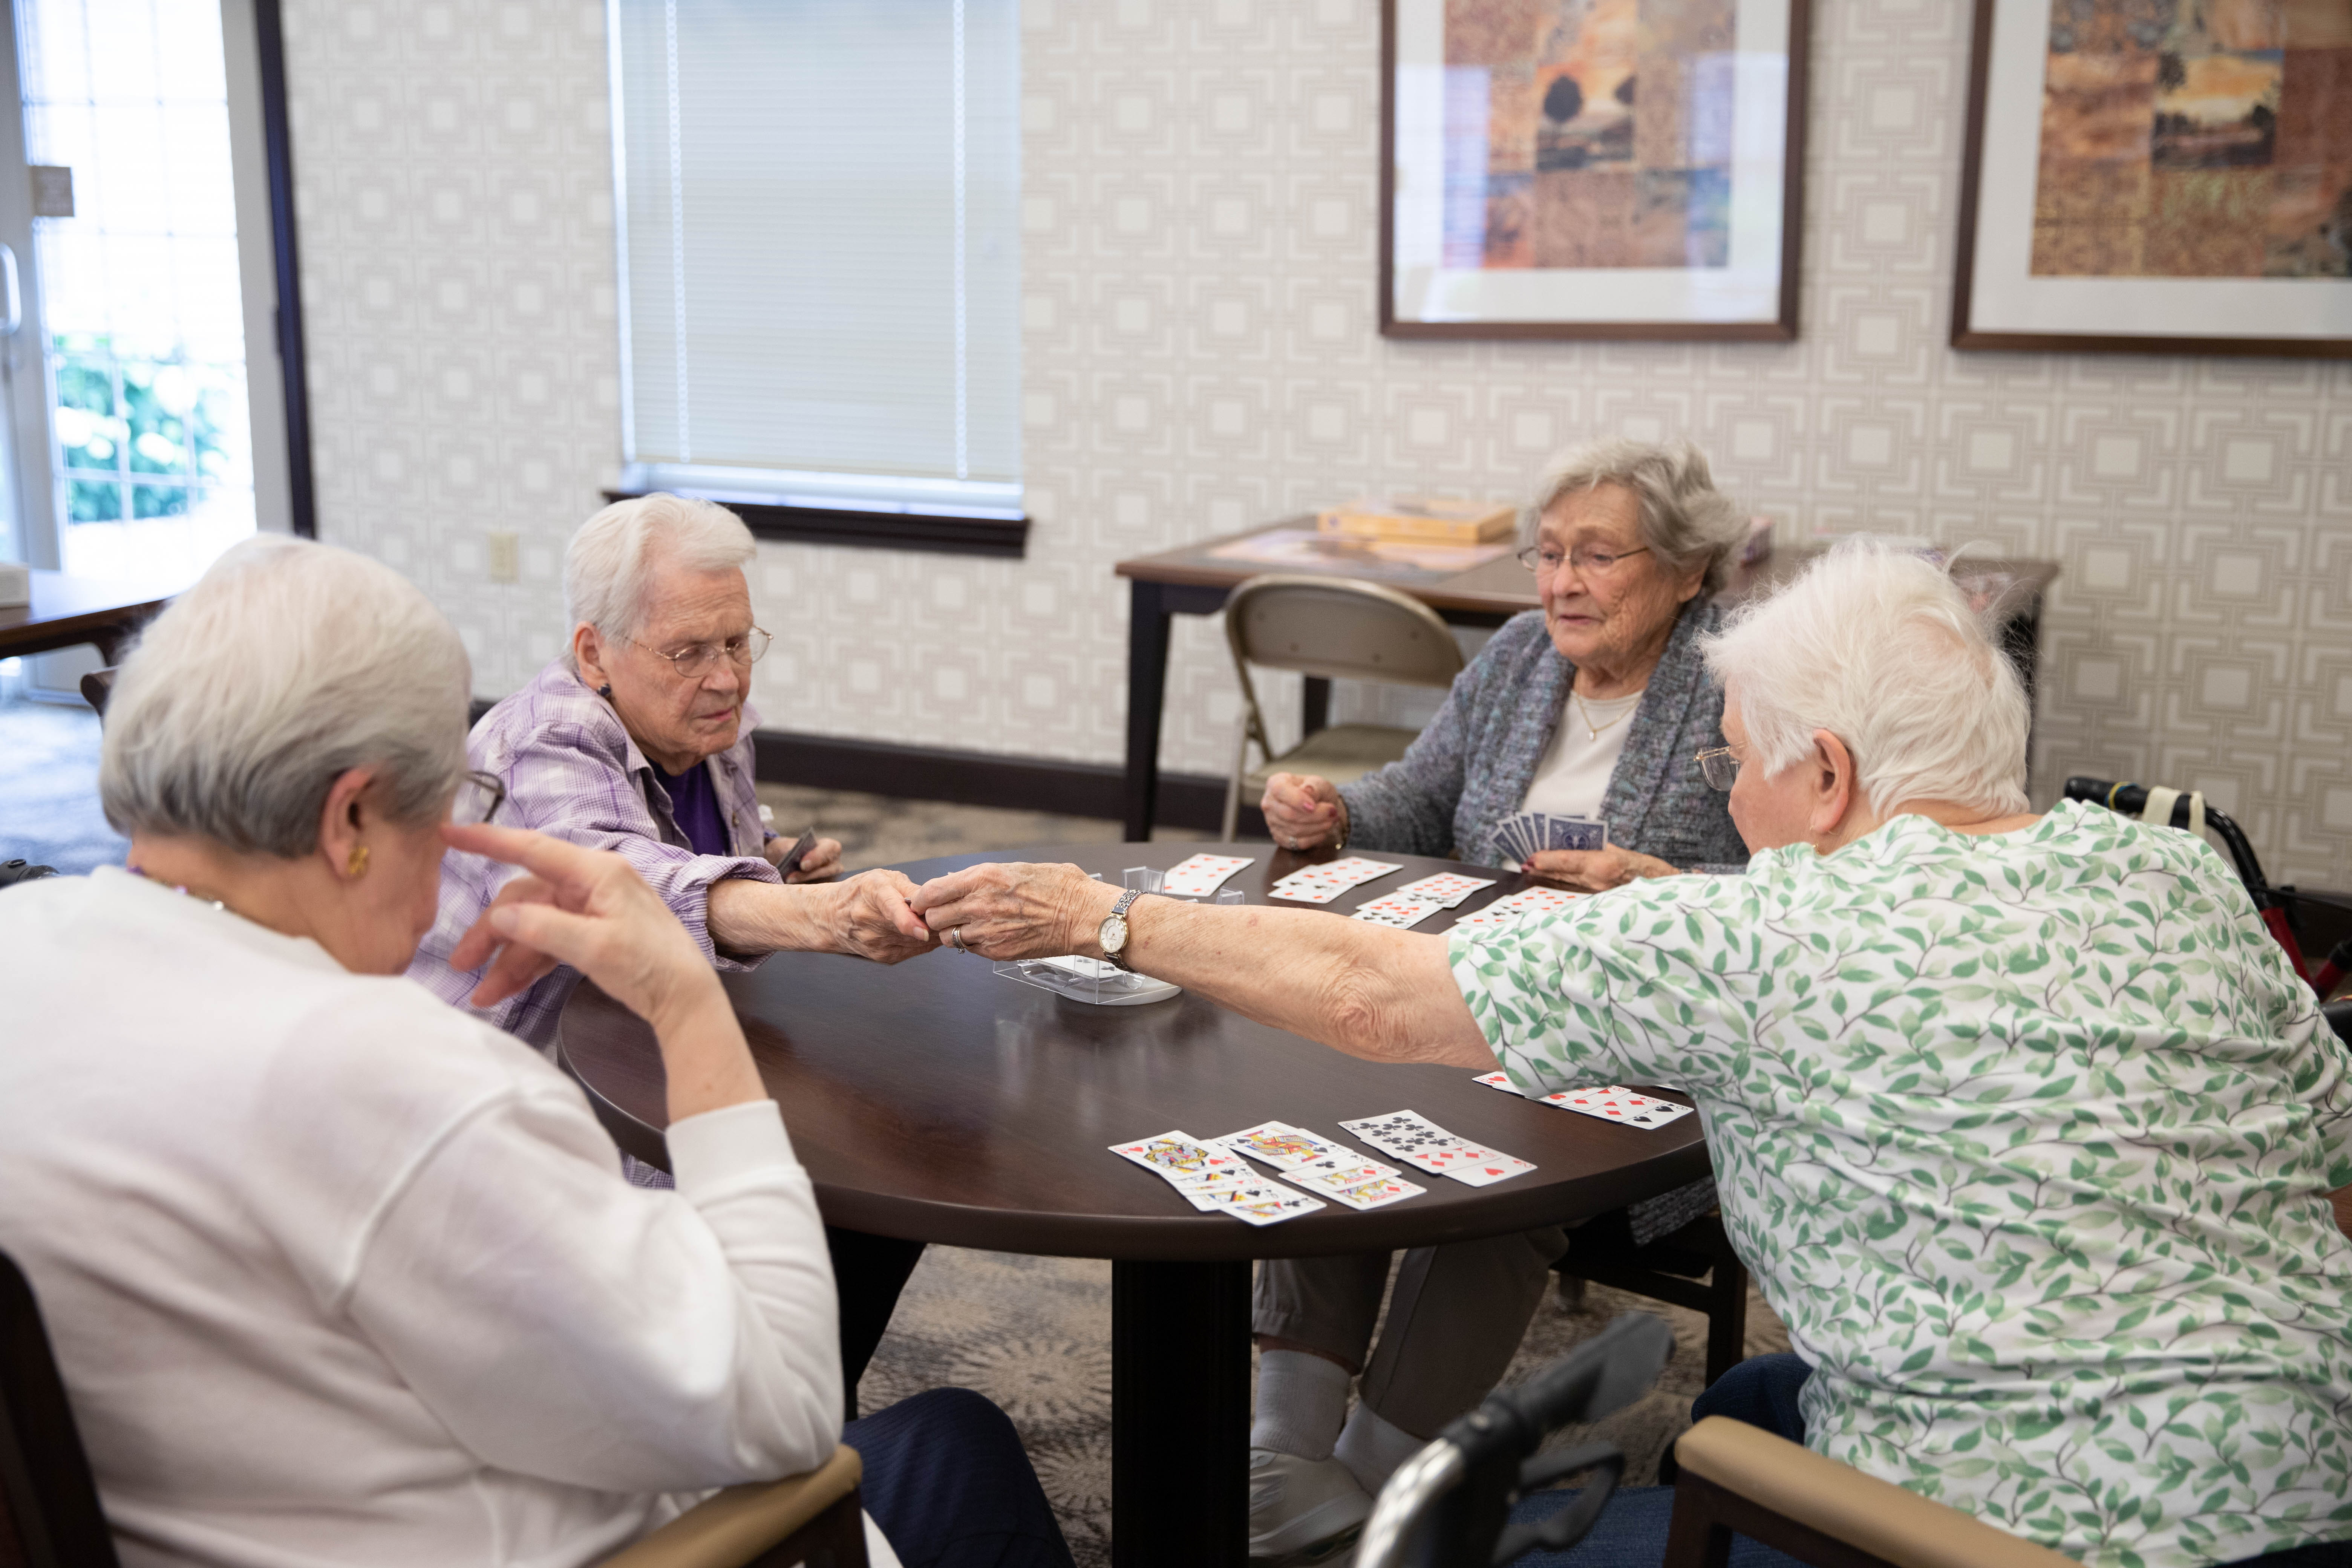 <span  class="uc_style_uc_tiles_grid_image_elementor_uc_items_attribute_title" style="color:#000000;">Residents playing cards together. </span>